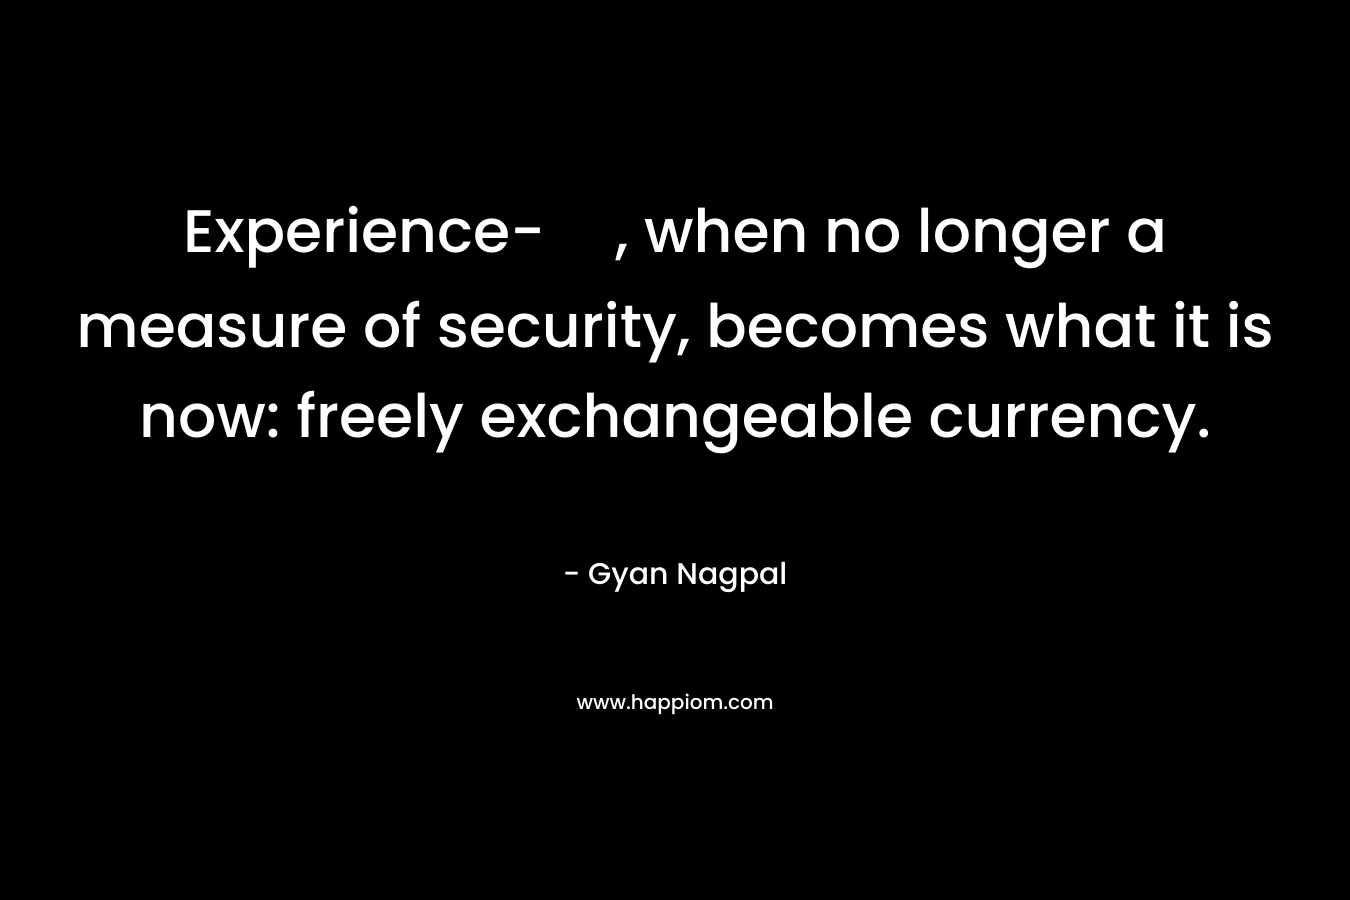 Experience-, when no longer a measure of security, becomes what it is now: freely exchangeable currency. – Gyan Nagpal